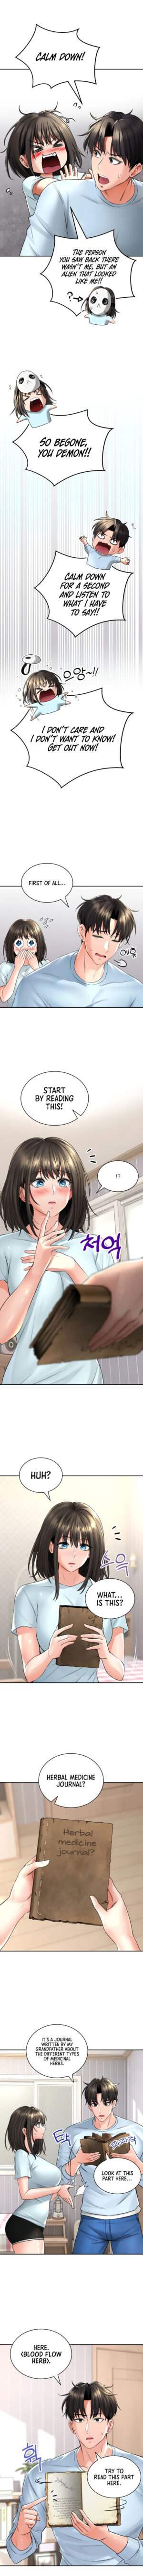 [Lee Juwon] Herbal Love Story (1-21) [English] [Omega Scans] [Ongoing]